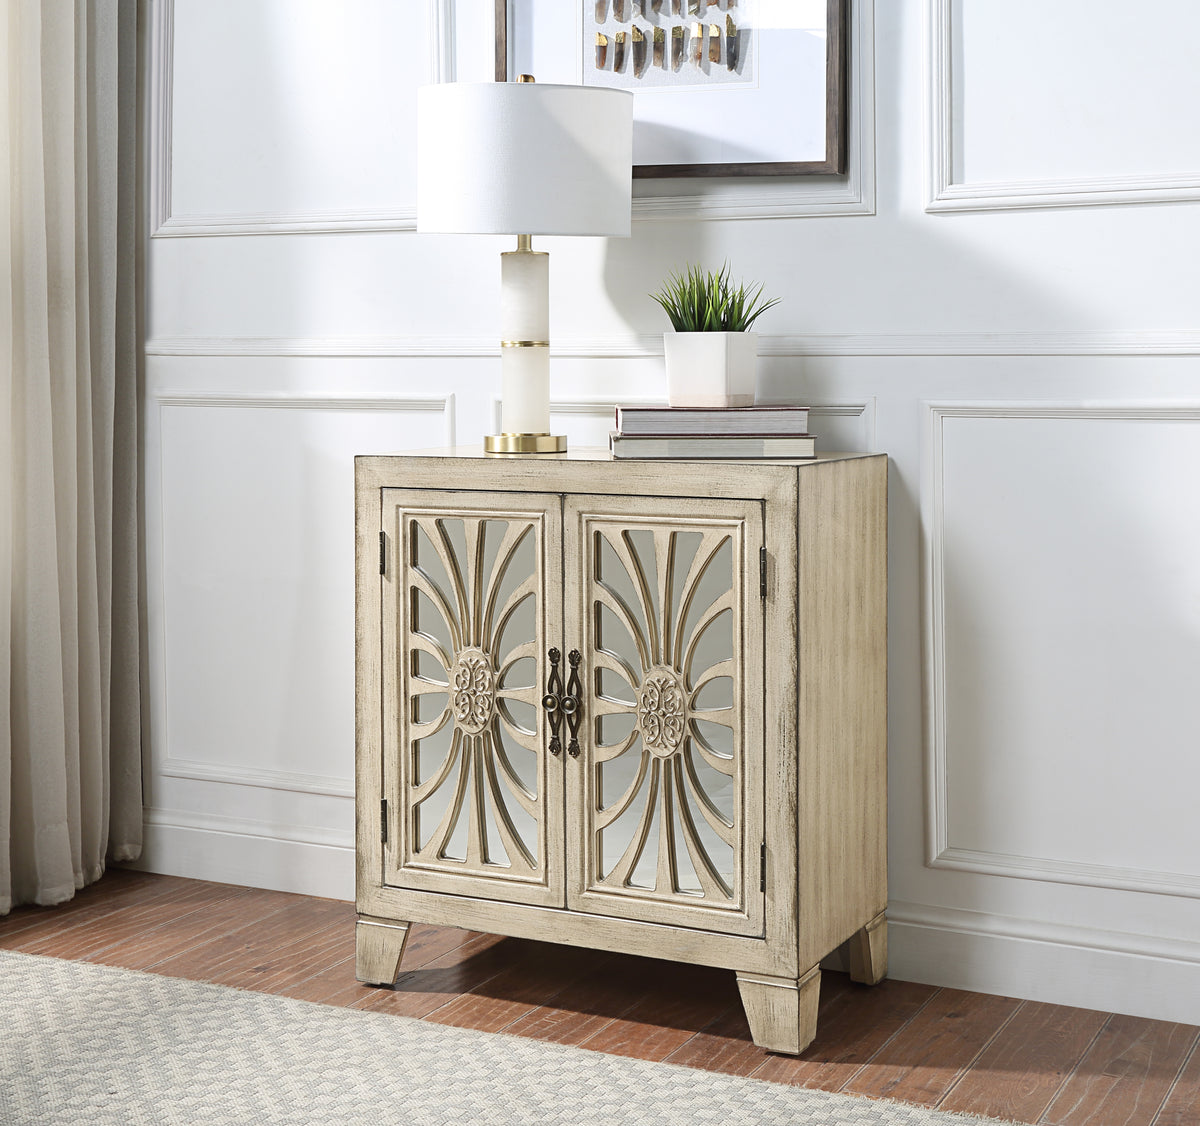 Cabinet Table with Storage - Antique White Finish